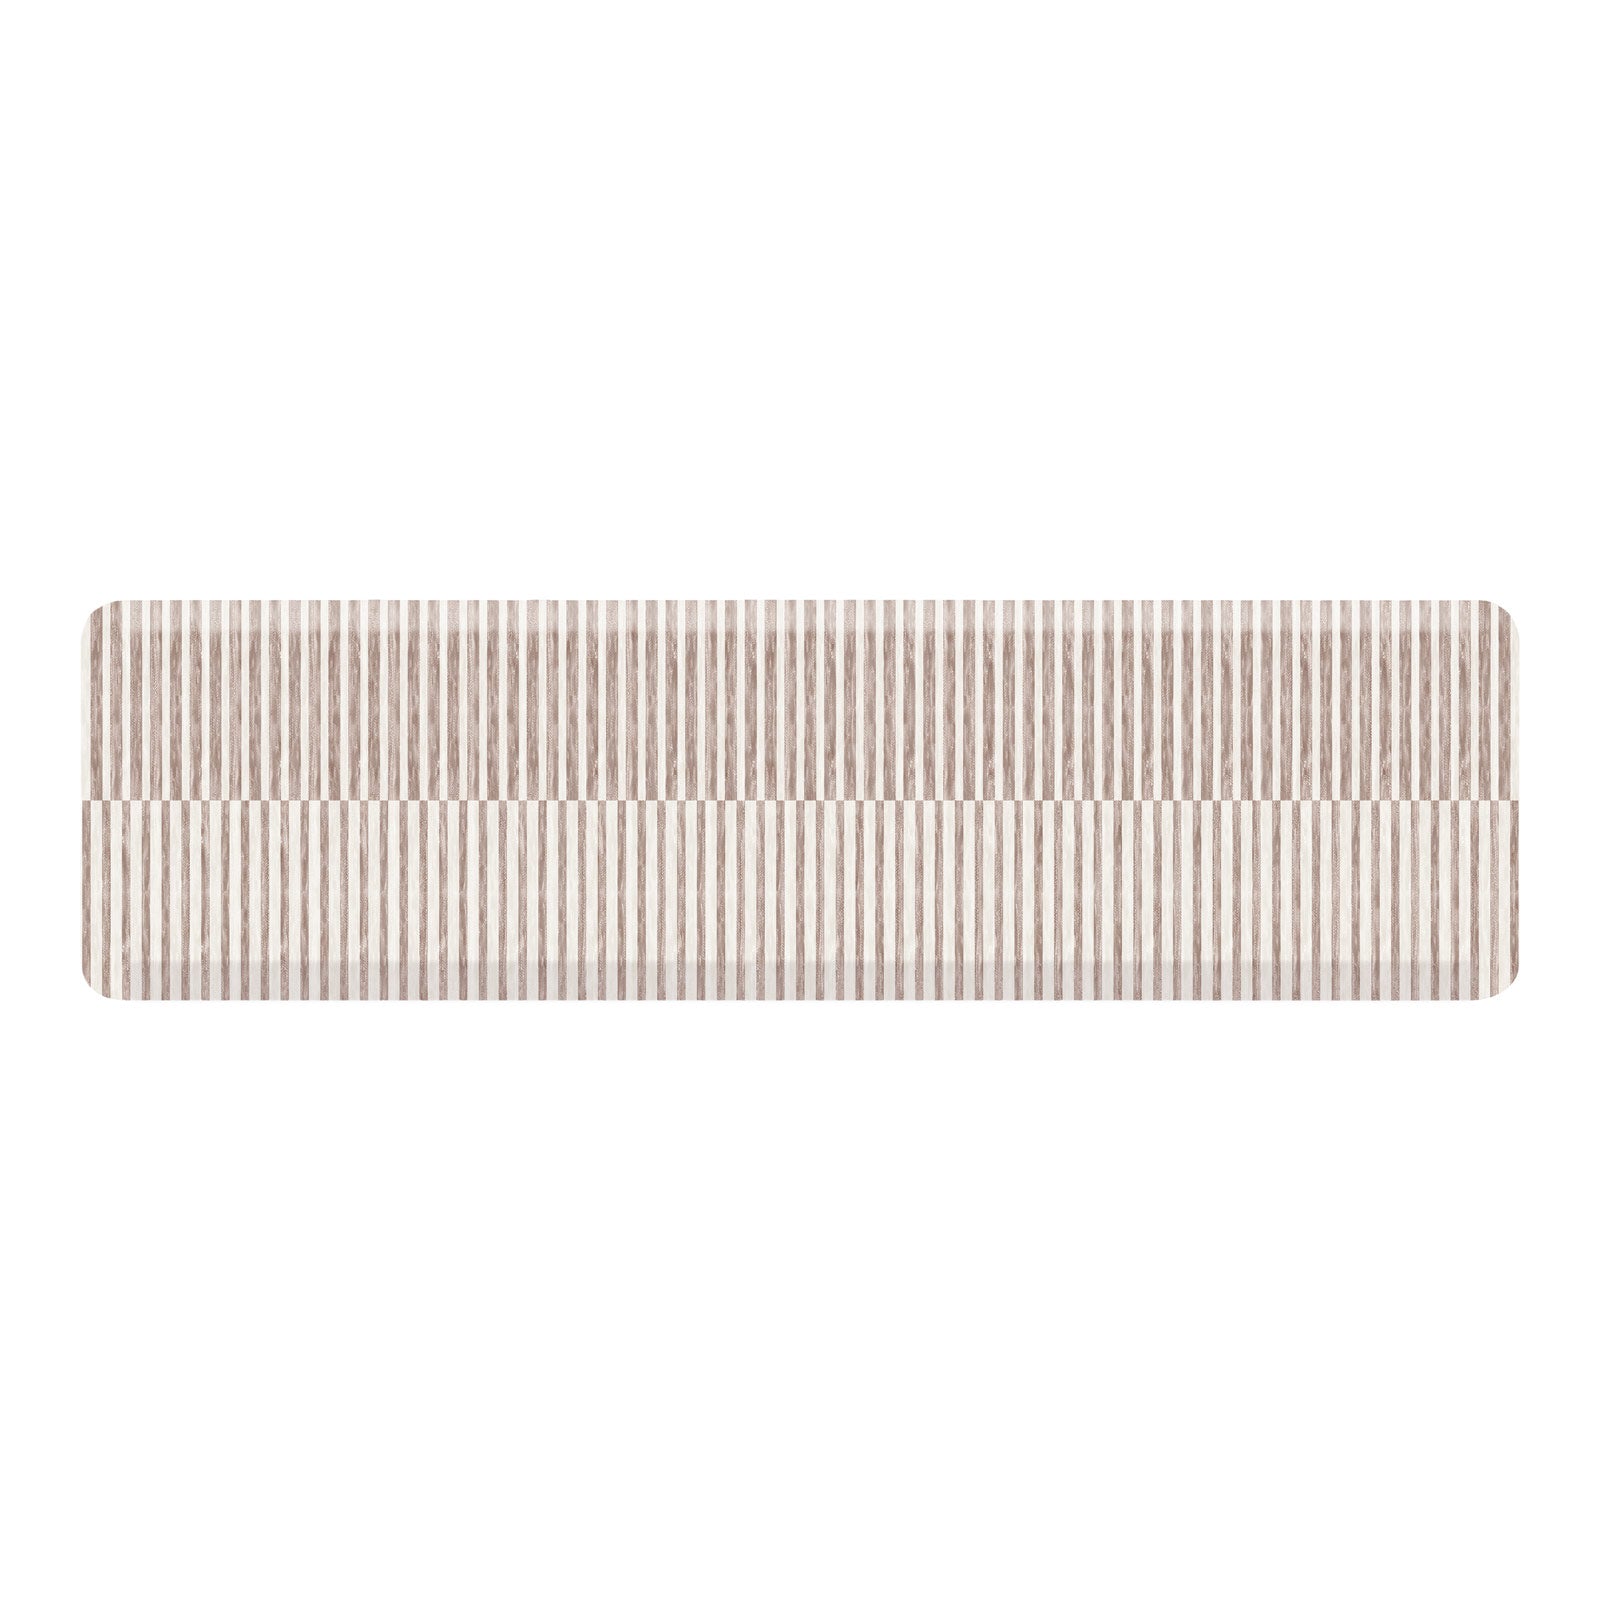 Reese chai beige and white inverted stripe standing mat shown in size 22x72